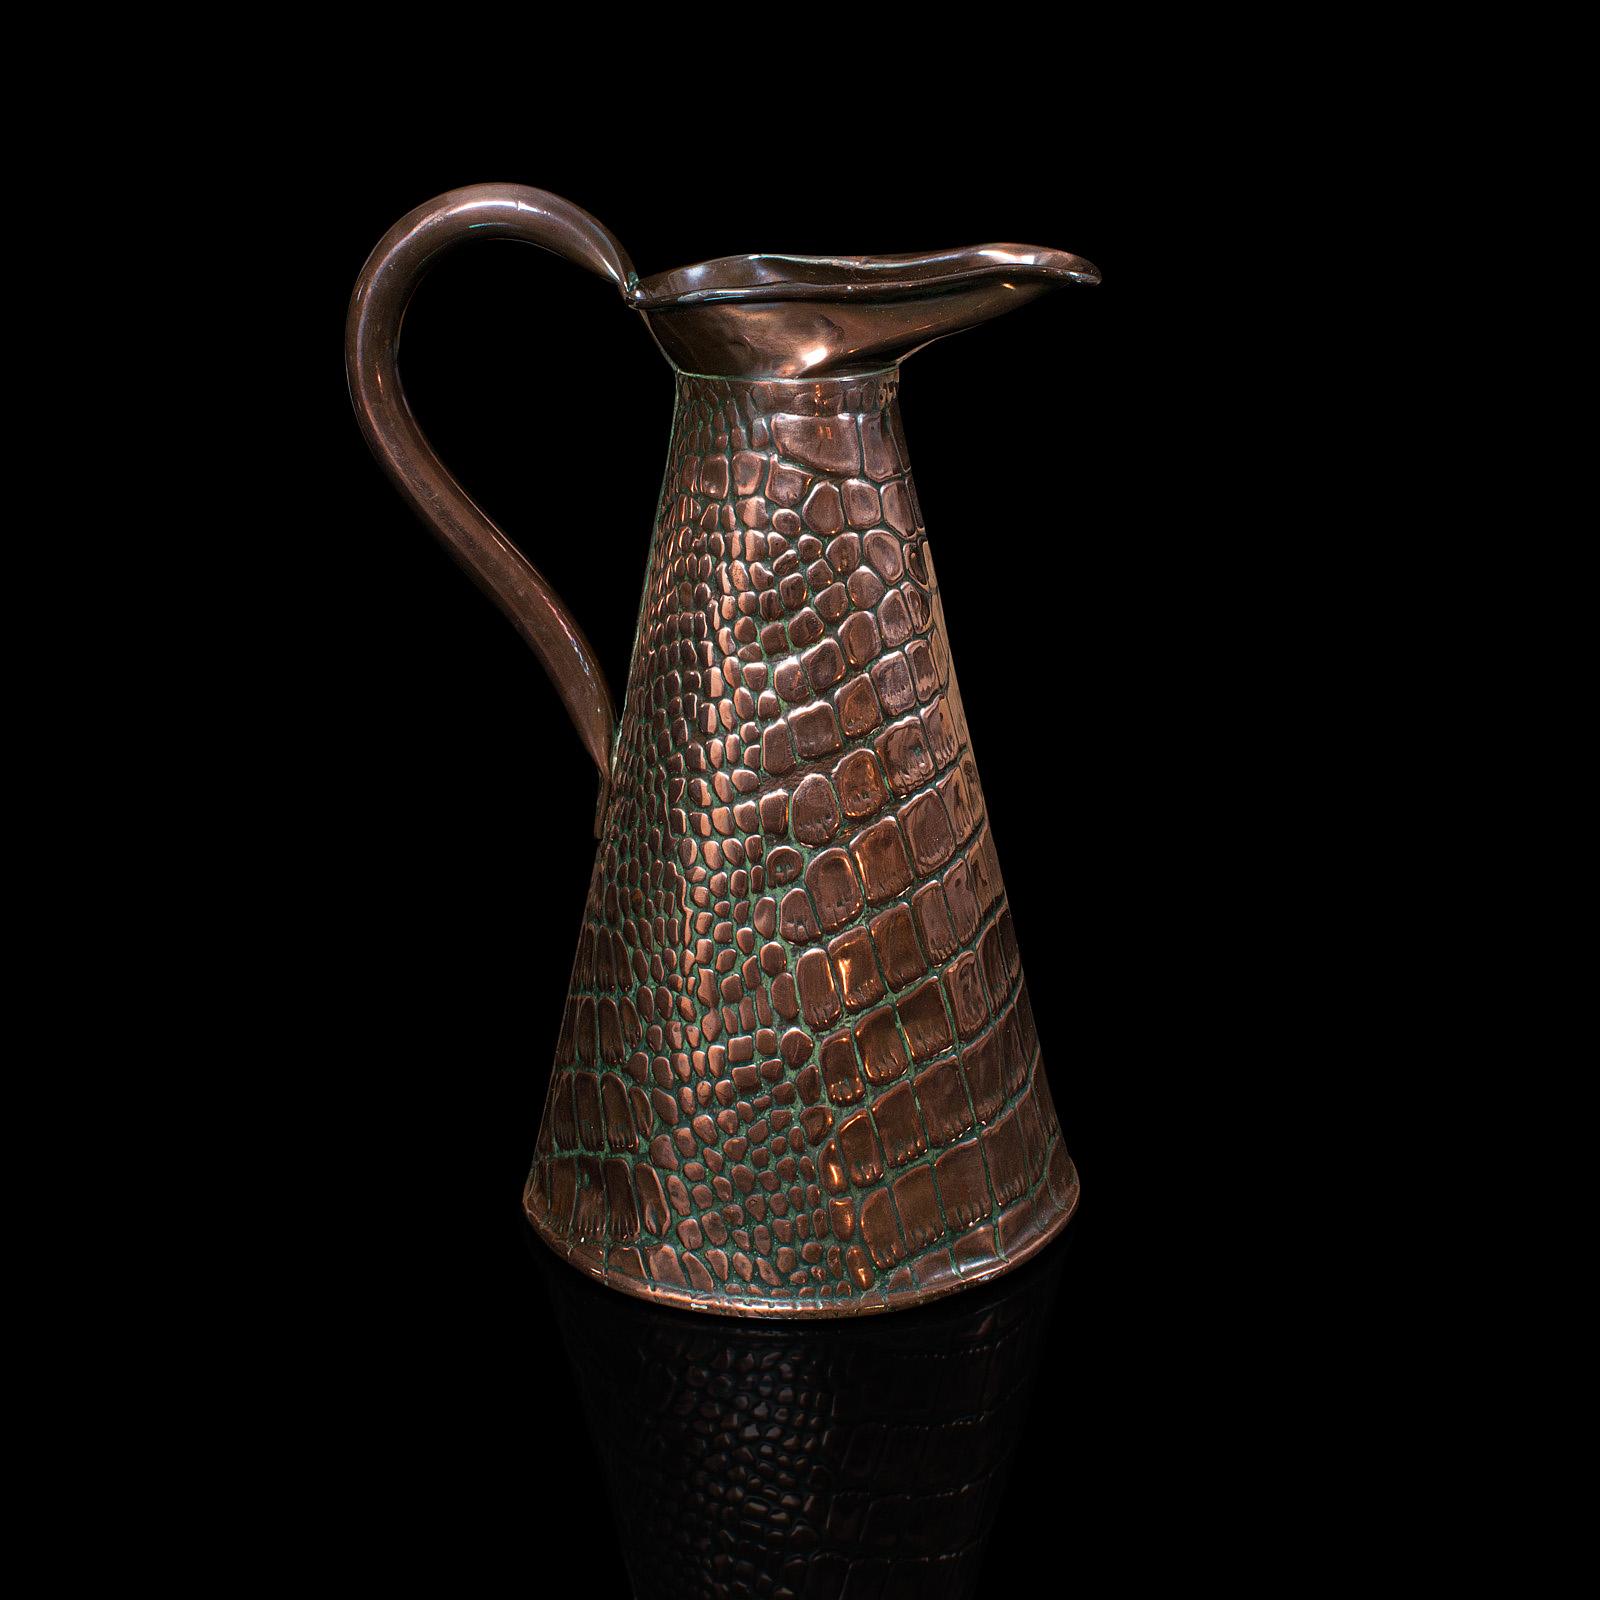 This is an antique serving ewer. An English, copper jug with decorative finish, dating to the Arts and Crafts period, circa 1900.

Distinctive antique ewer with Fine weathering
Displays a desirable aged patina with time-worn impressions to